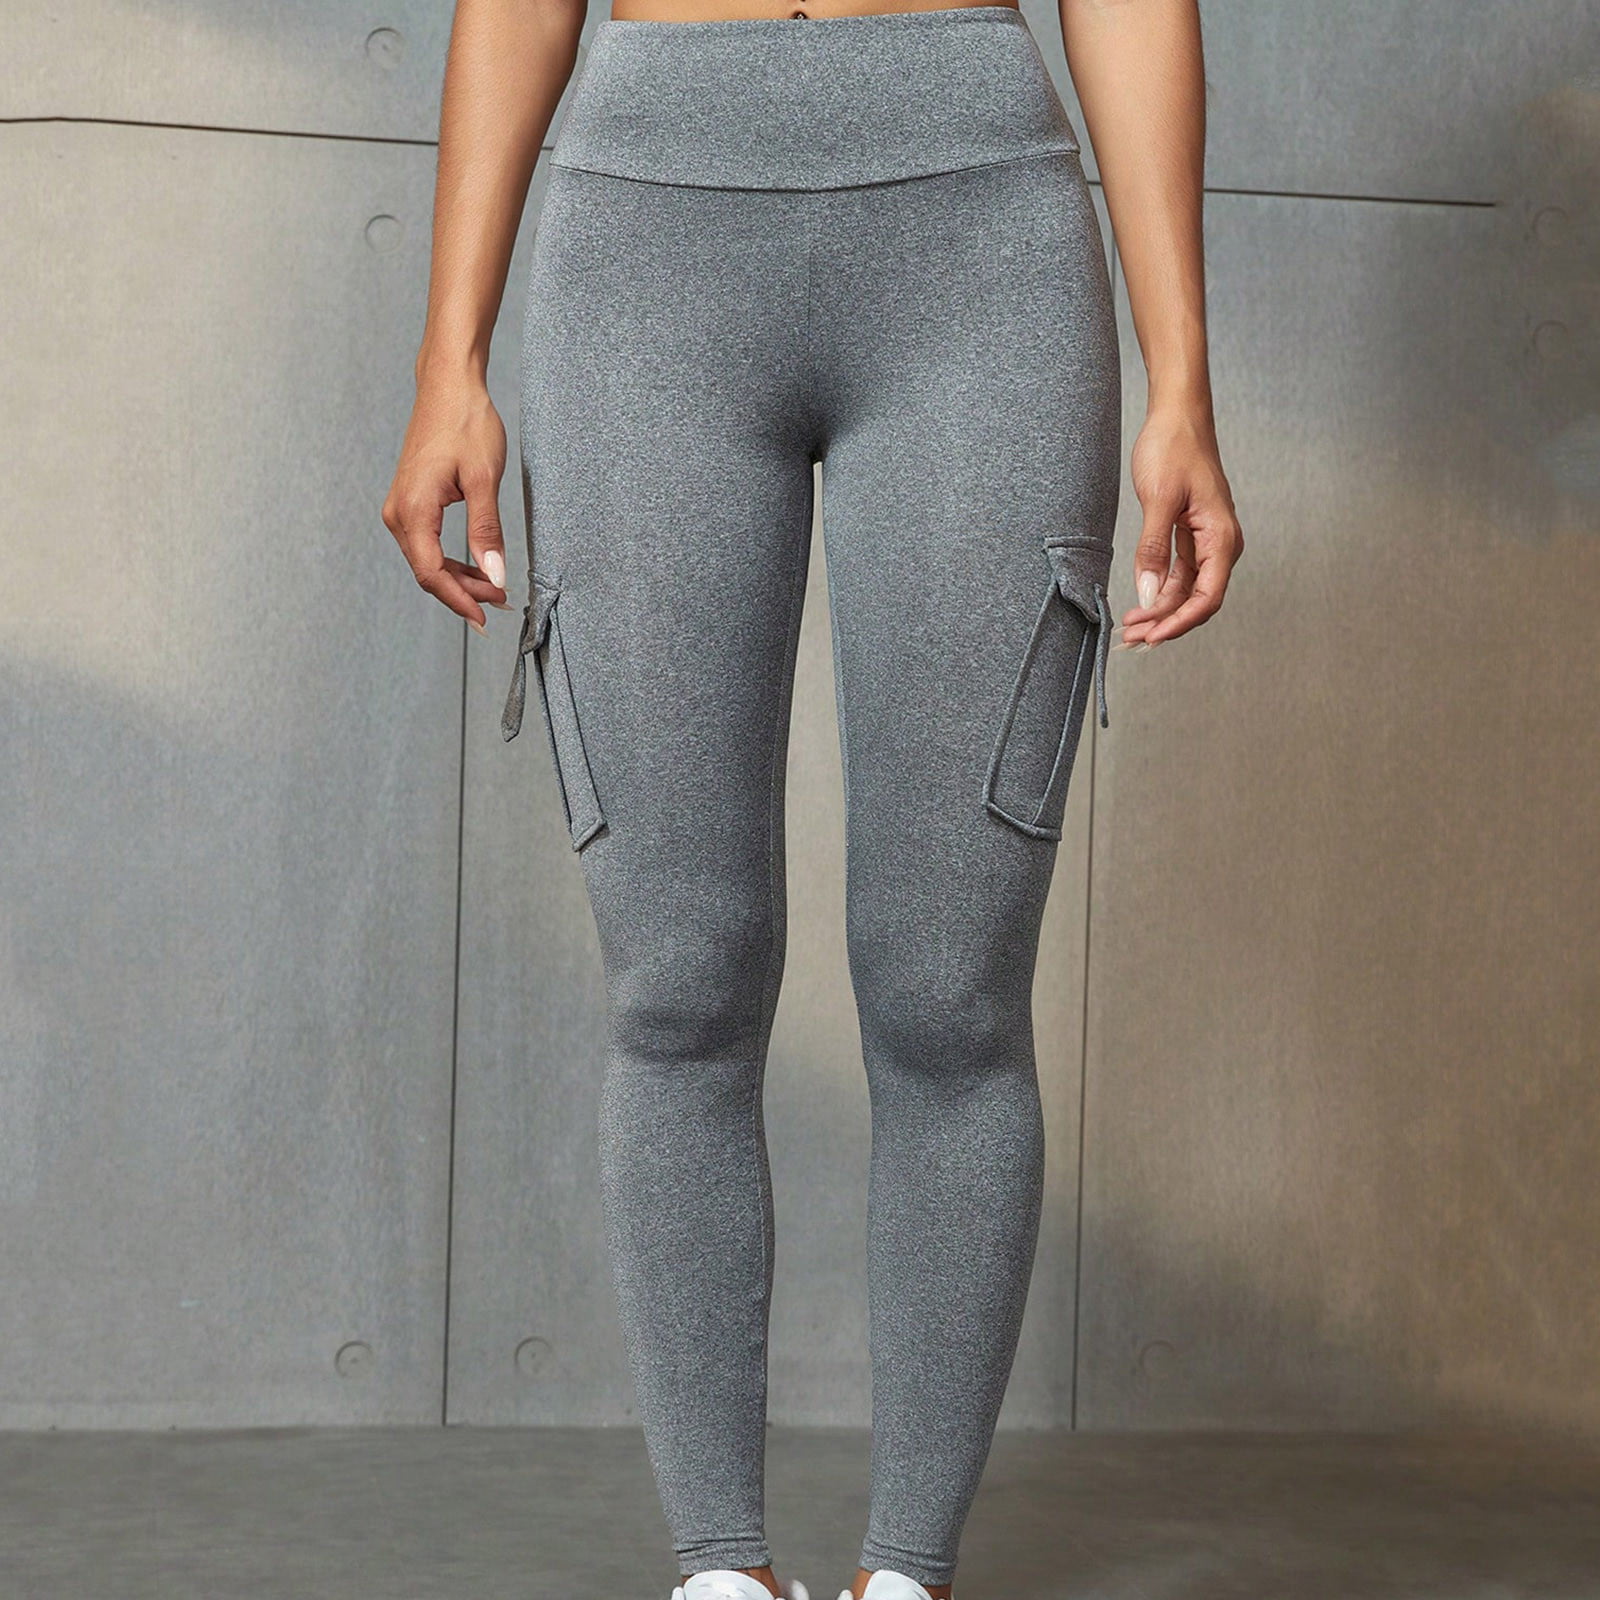 Hibiscus Cargo Workout Leggings w/ Side-Zippered Pockets